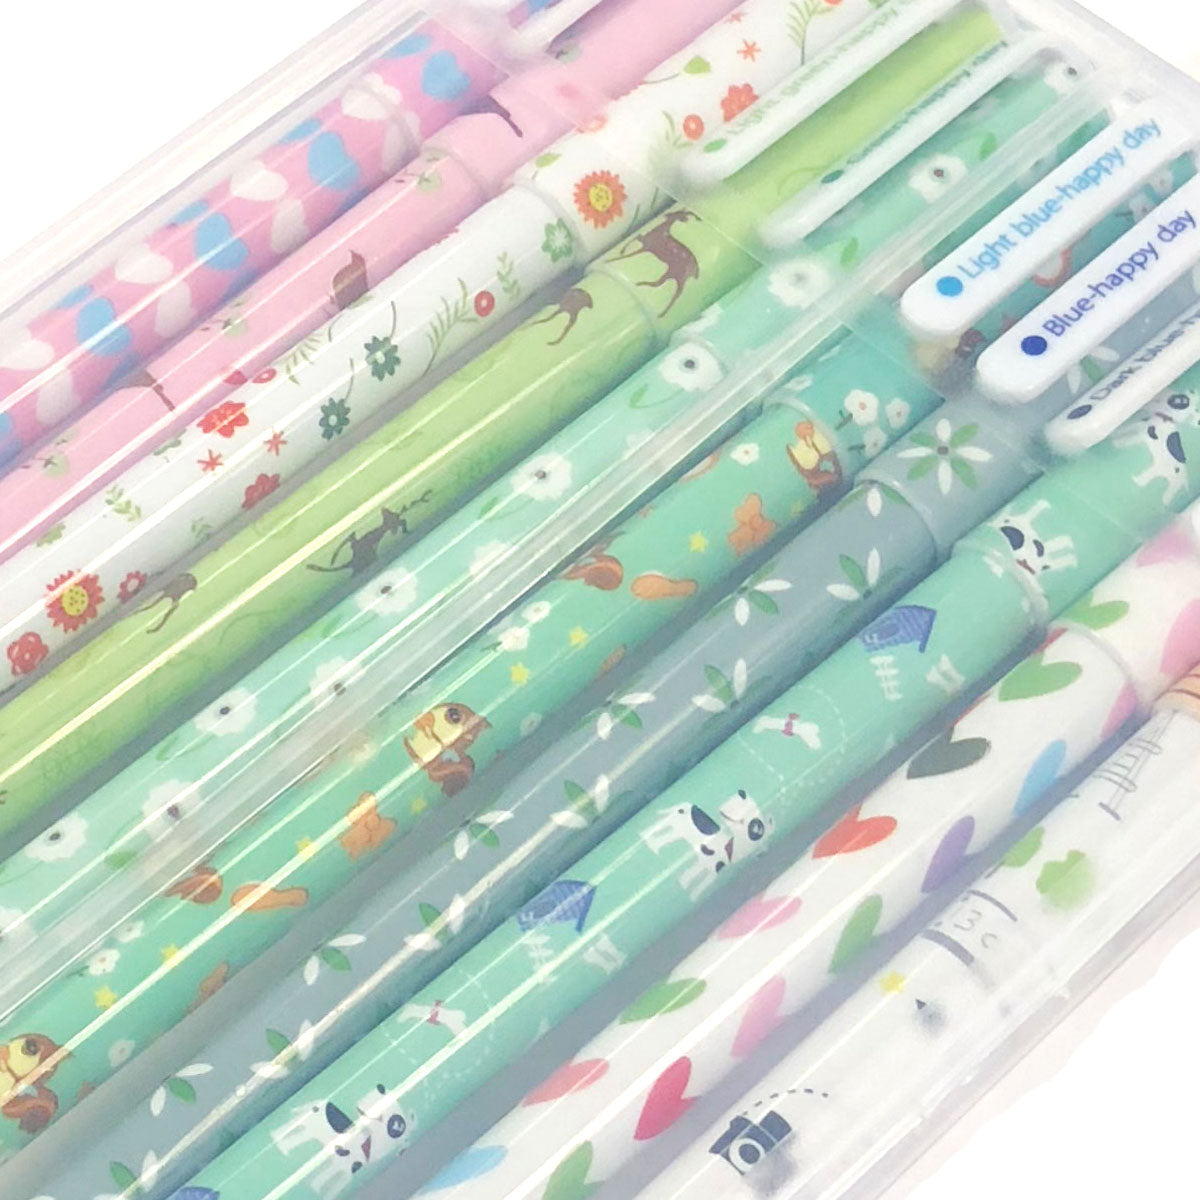 Wrapables Cute Novelty Gel Ink Pens, 0.5mm Fine Point (Set of 10) for School, Office, Stationery